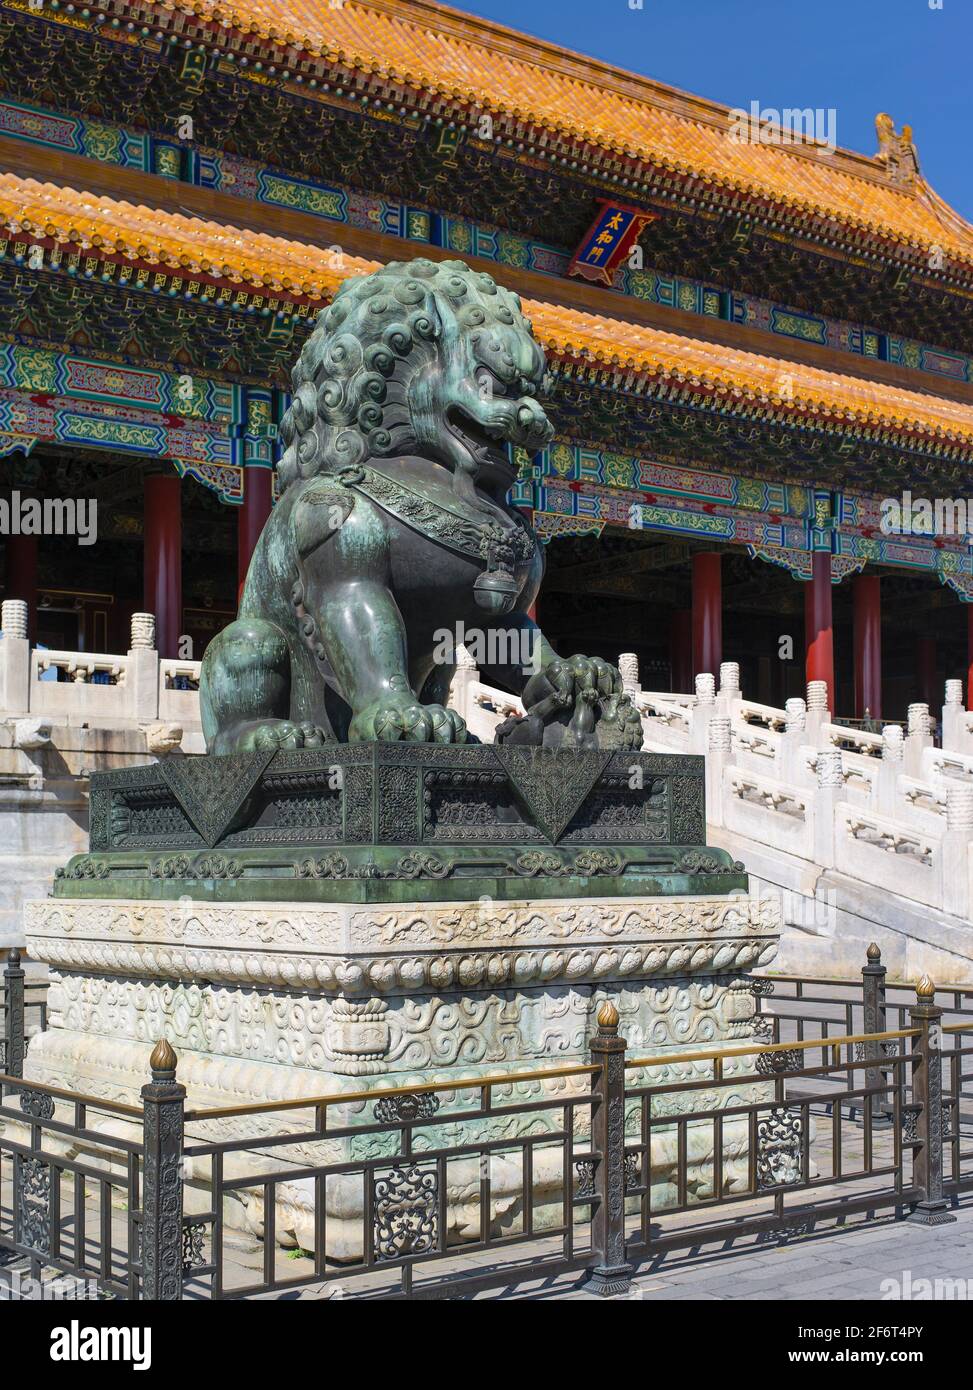 The Forbidden City was the Chinese imperial palace from the Ming Dynasty to the end of the Qing Dynasty. It is located in the middle of Beijing, Stock Photo